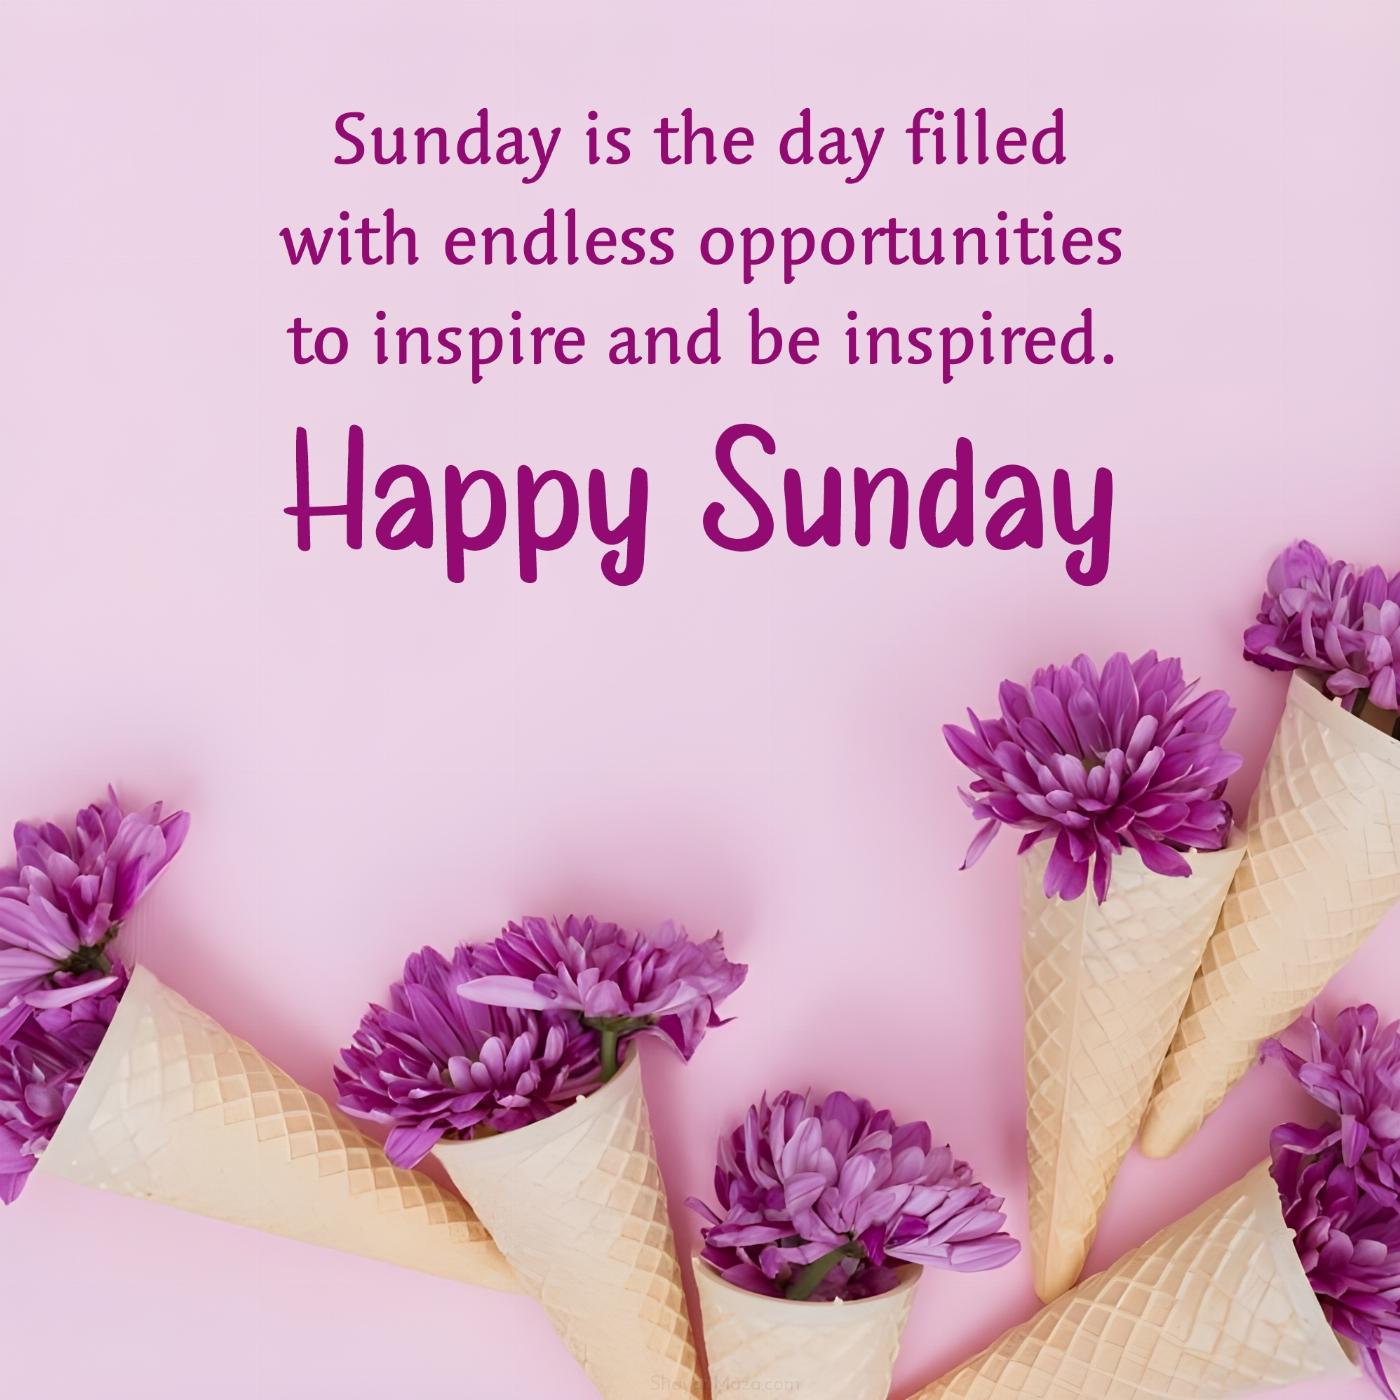 Sunday is the day filled with endless opportunities to inspire